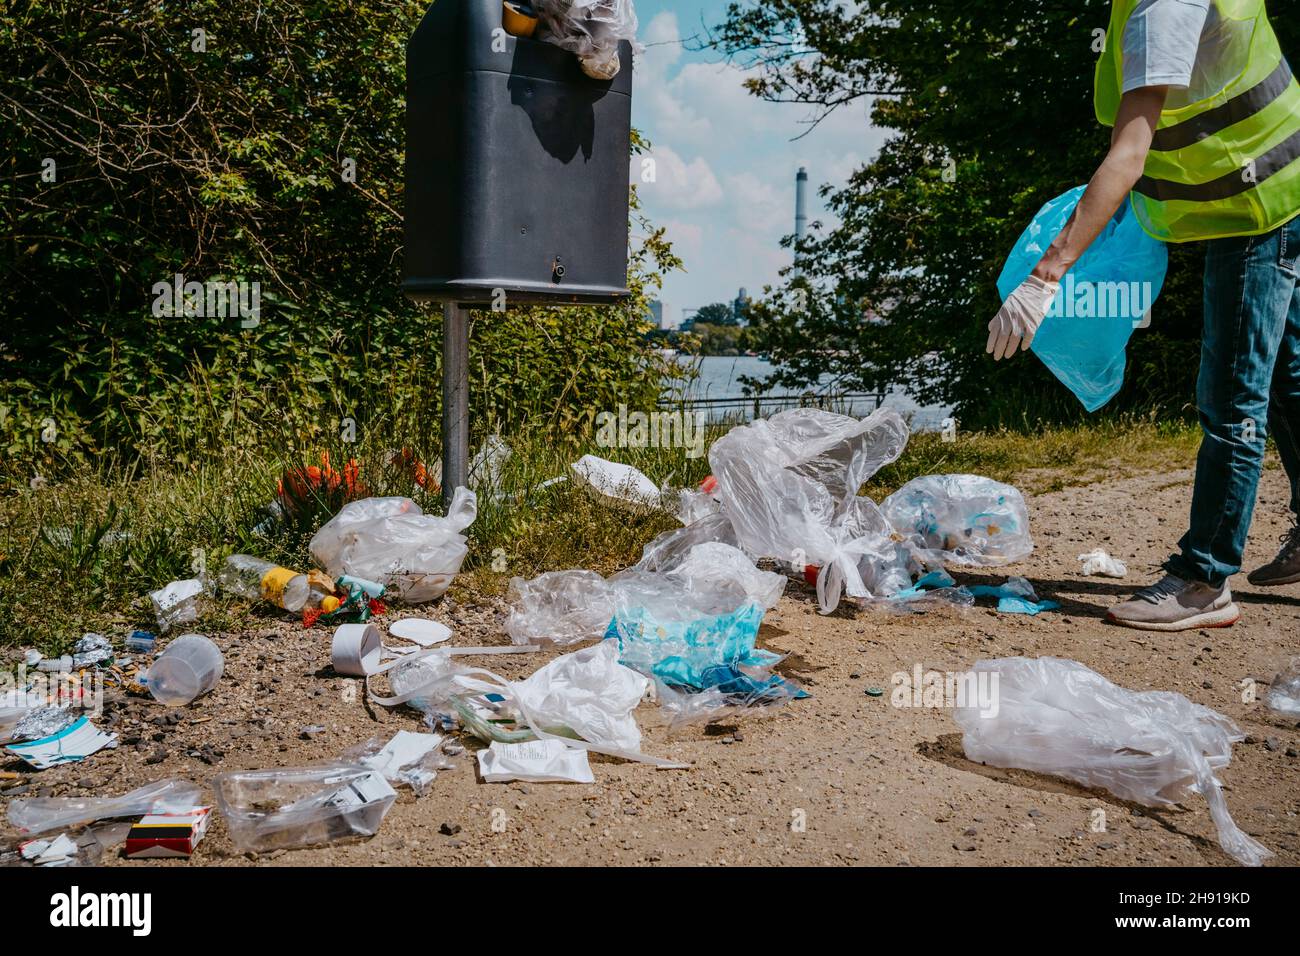 Low section of male volunteer collecting plastic waste in garbage bin Stock Photo